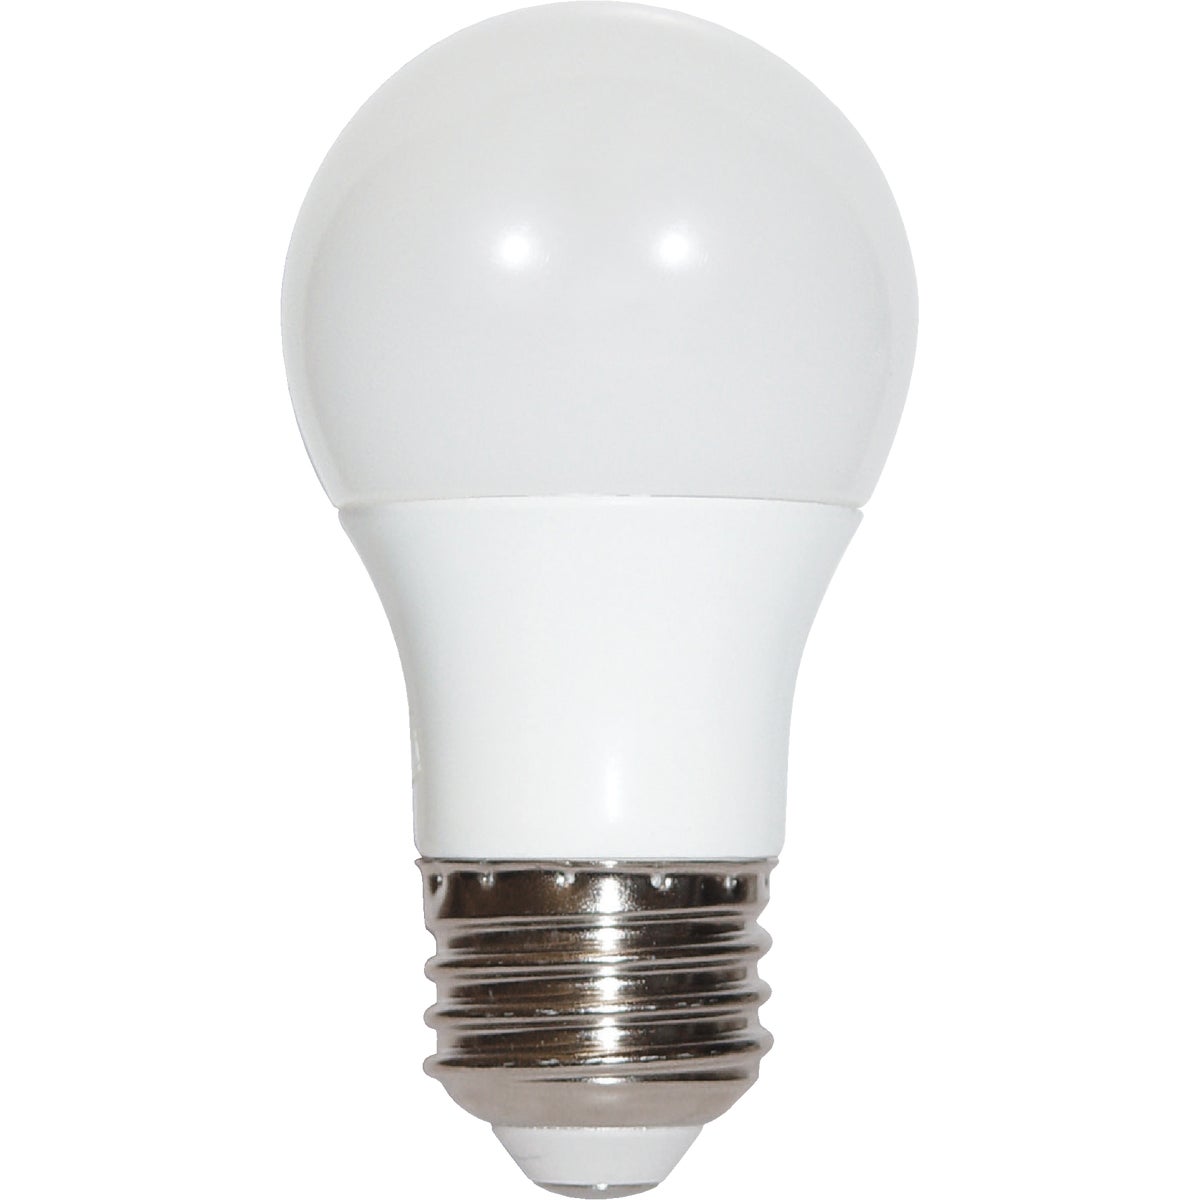 Satco 40W Equivalent Warm White A15 Medium Dimmable LED Light Bulb